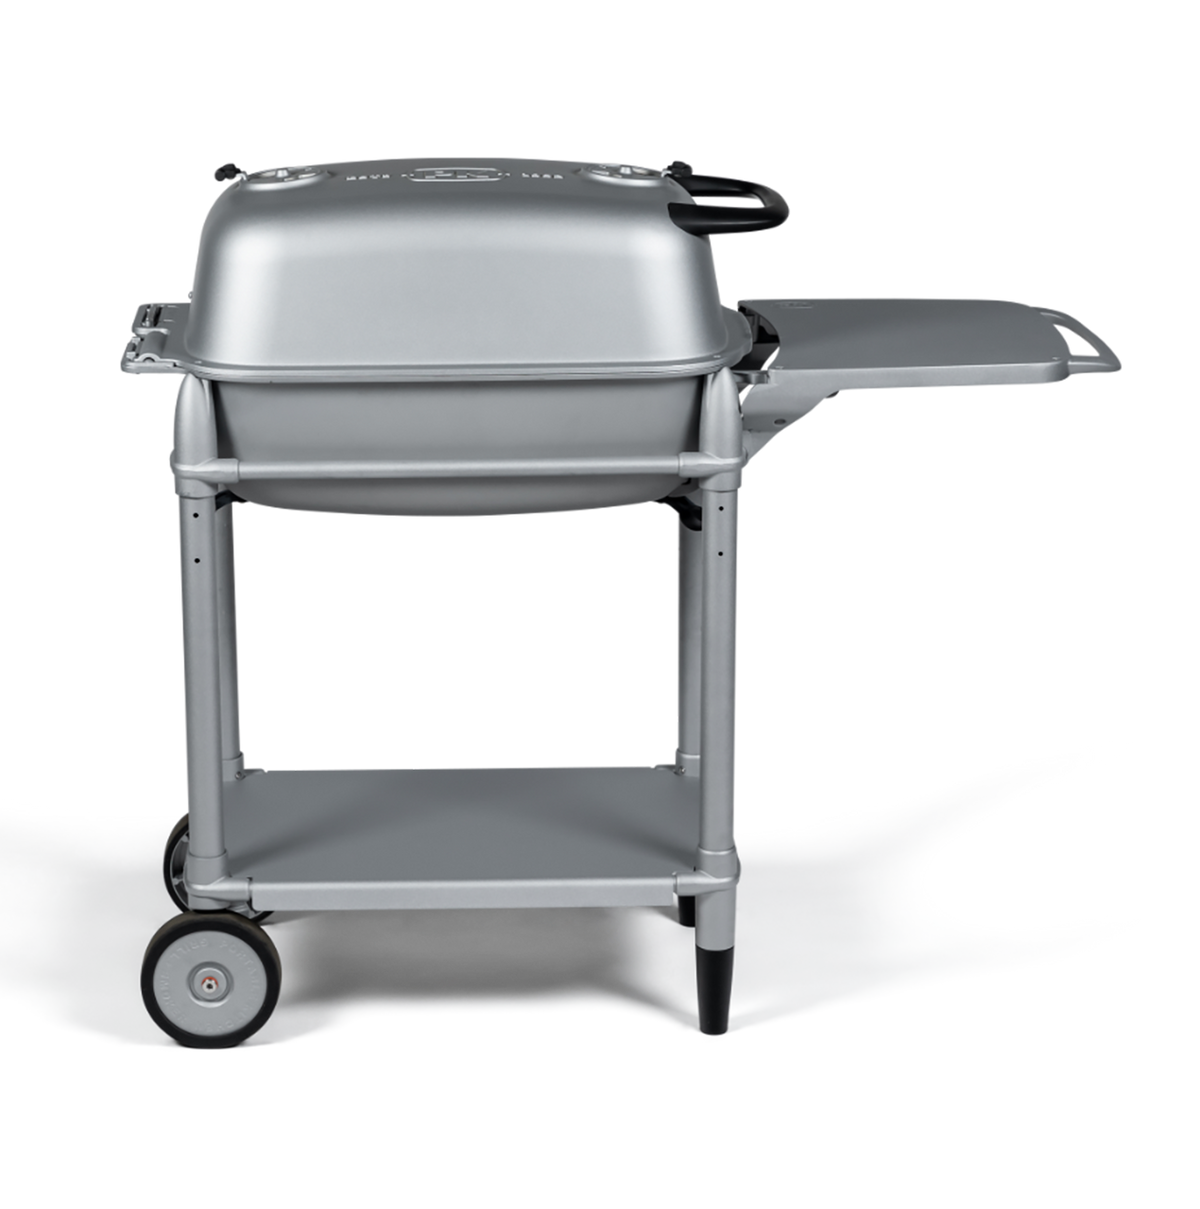 PK Grills The New Original PK300 Grill and Smoker